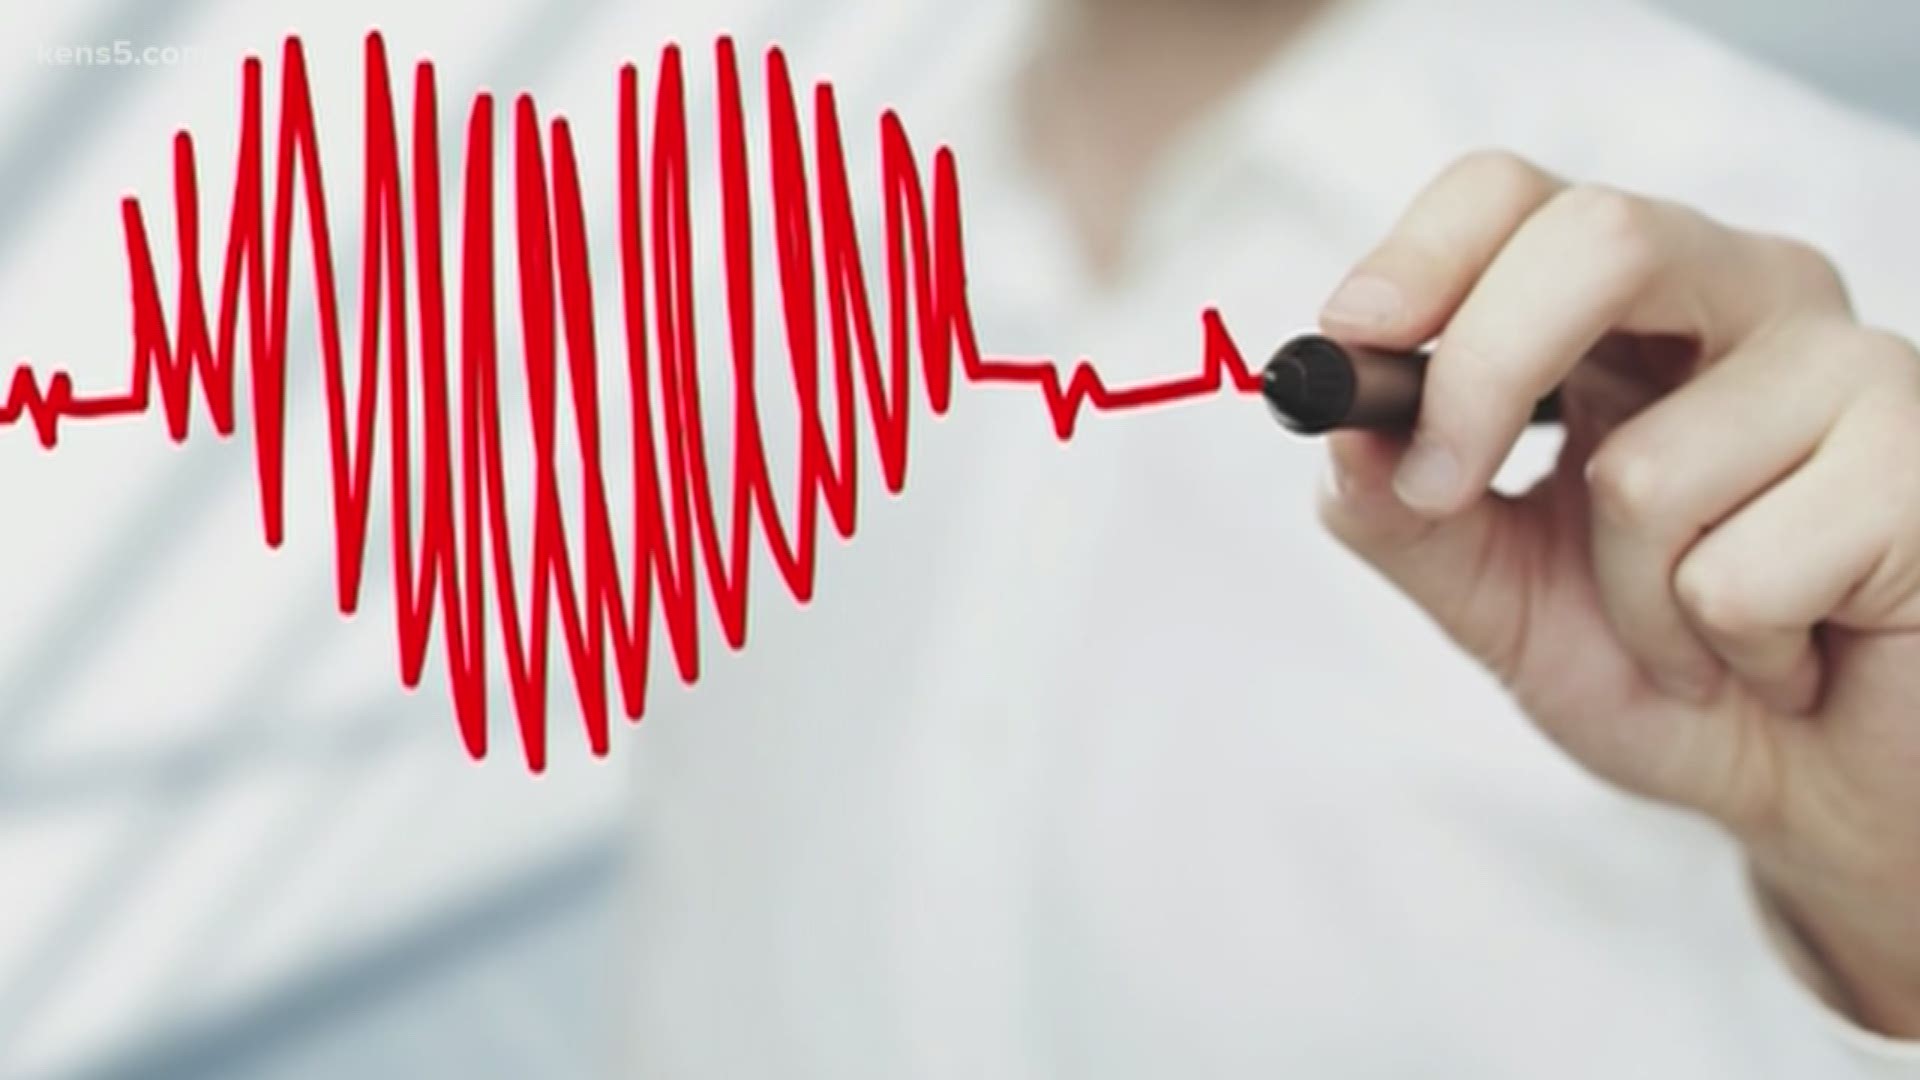 Heart disease used to be considered a man's disease, leaving many women undiagnosed when they could have had a cardiovascular illness. Ten years ago, roughly one in every three women died from heart disease. That number has improved to one in four, but there is still plenty of room to keep bringing down that number.